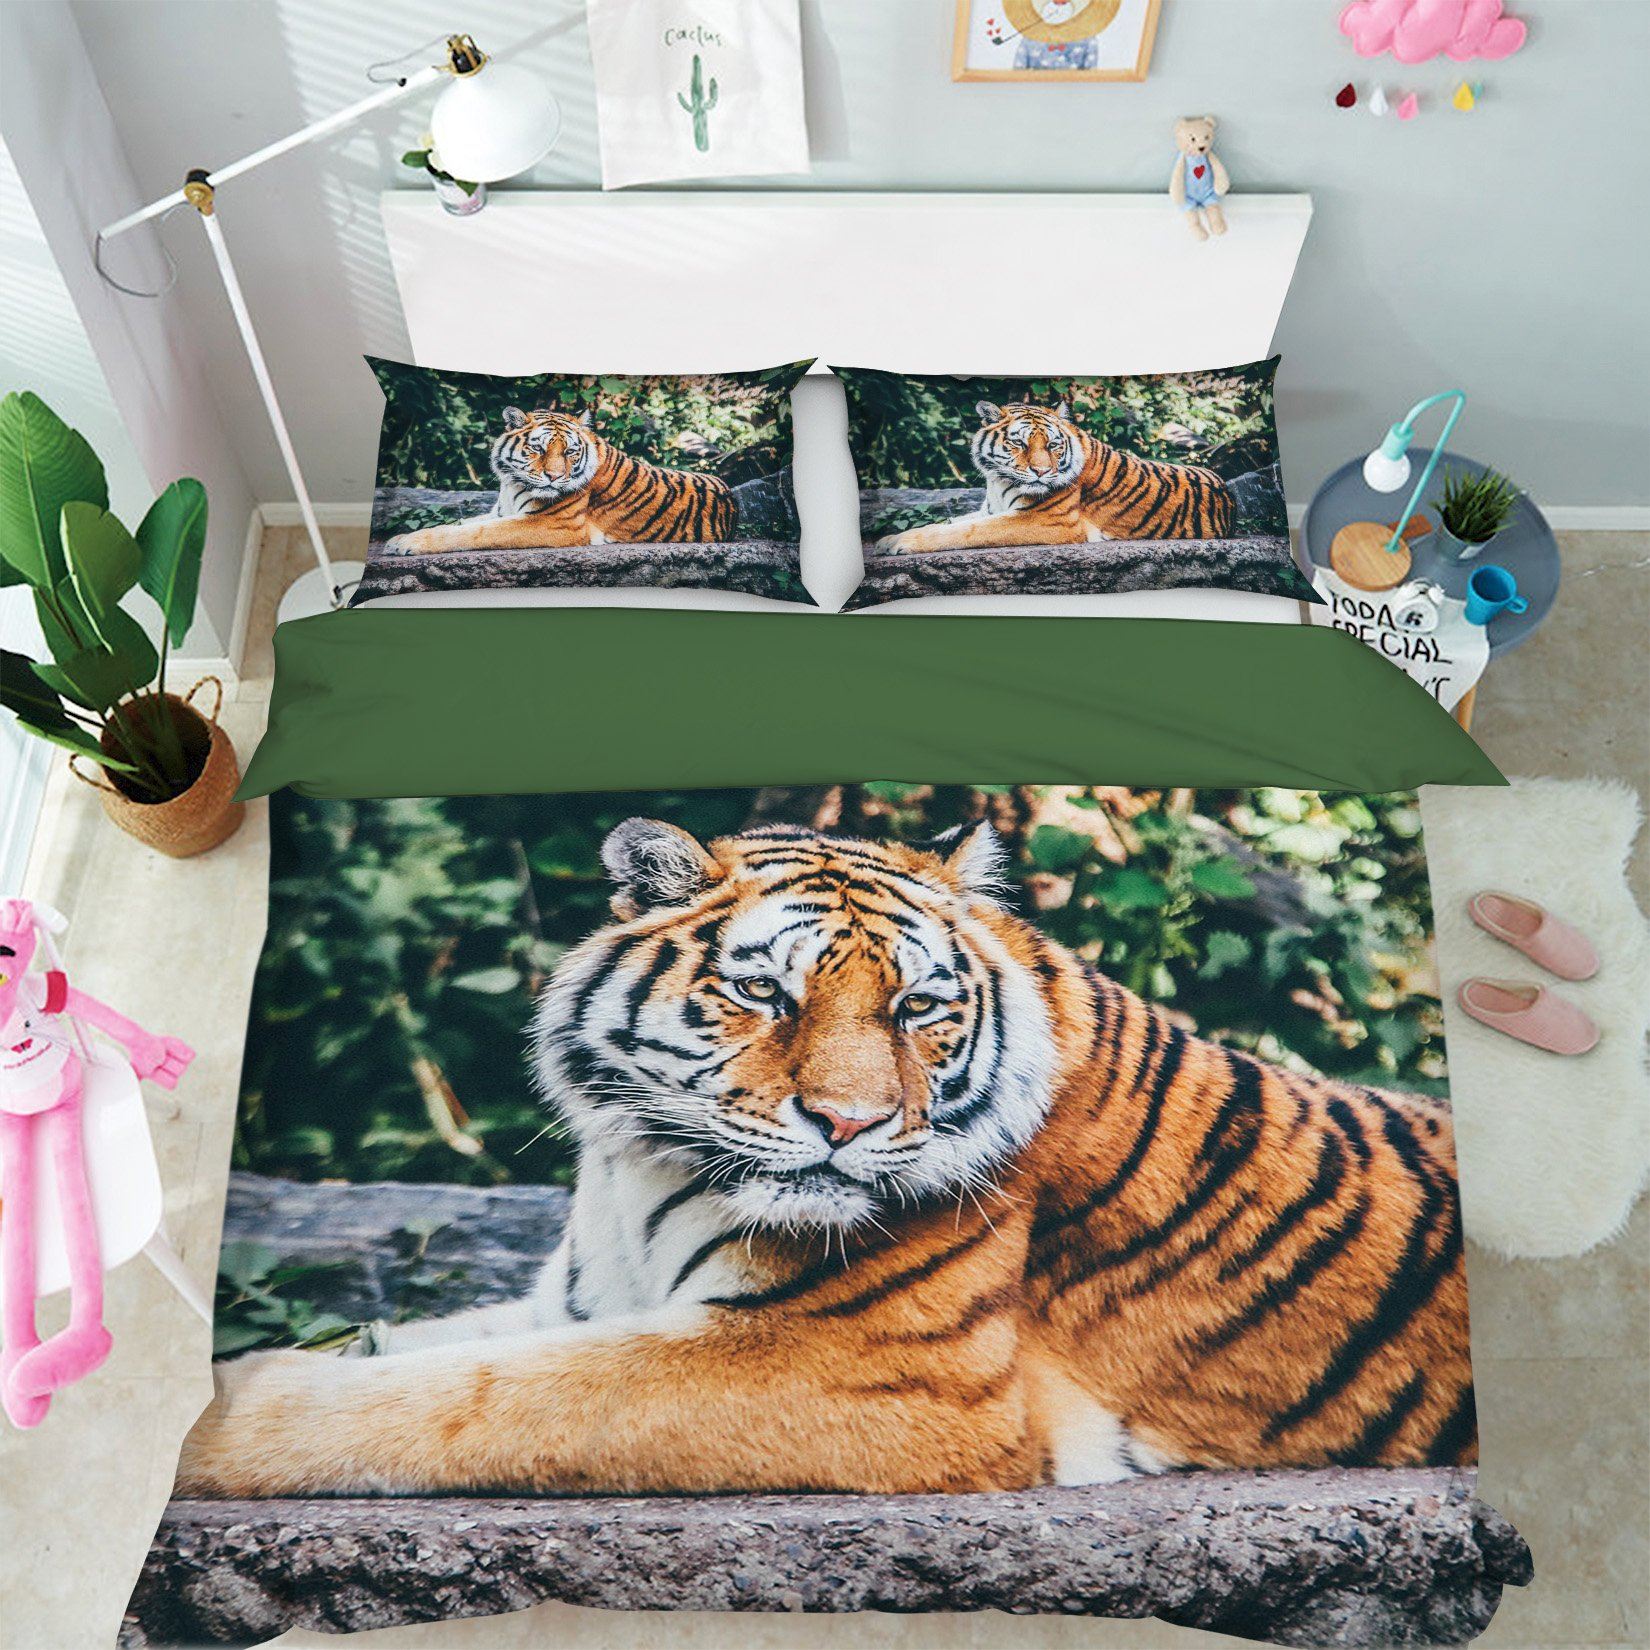 3D Tiger 1916 Bed Pillowcases Quilt Quiet Covers AJ Creativity Home 